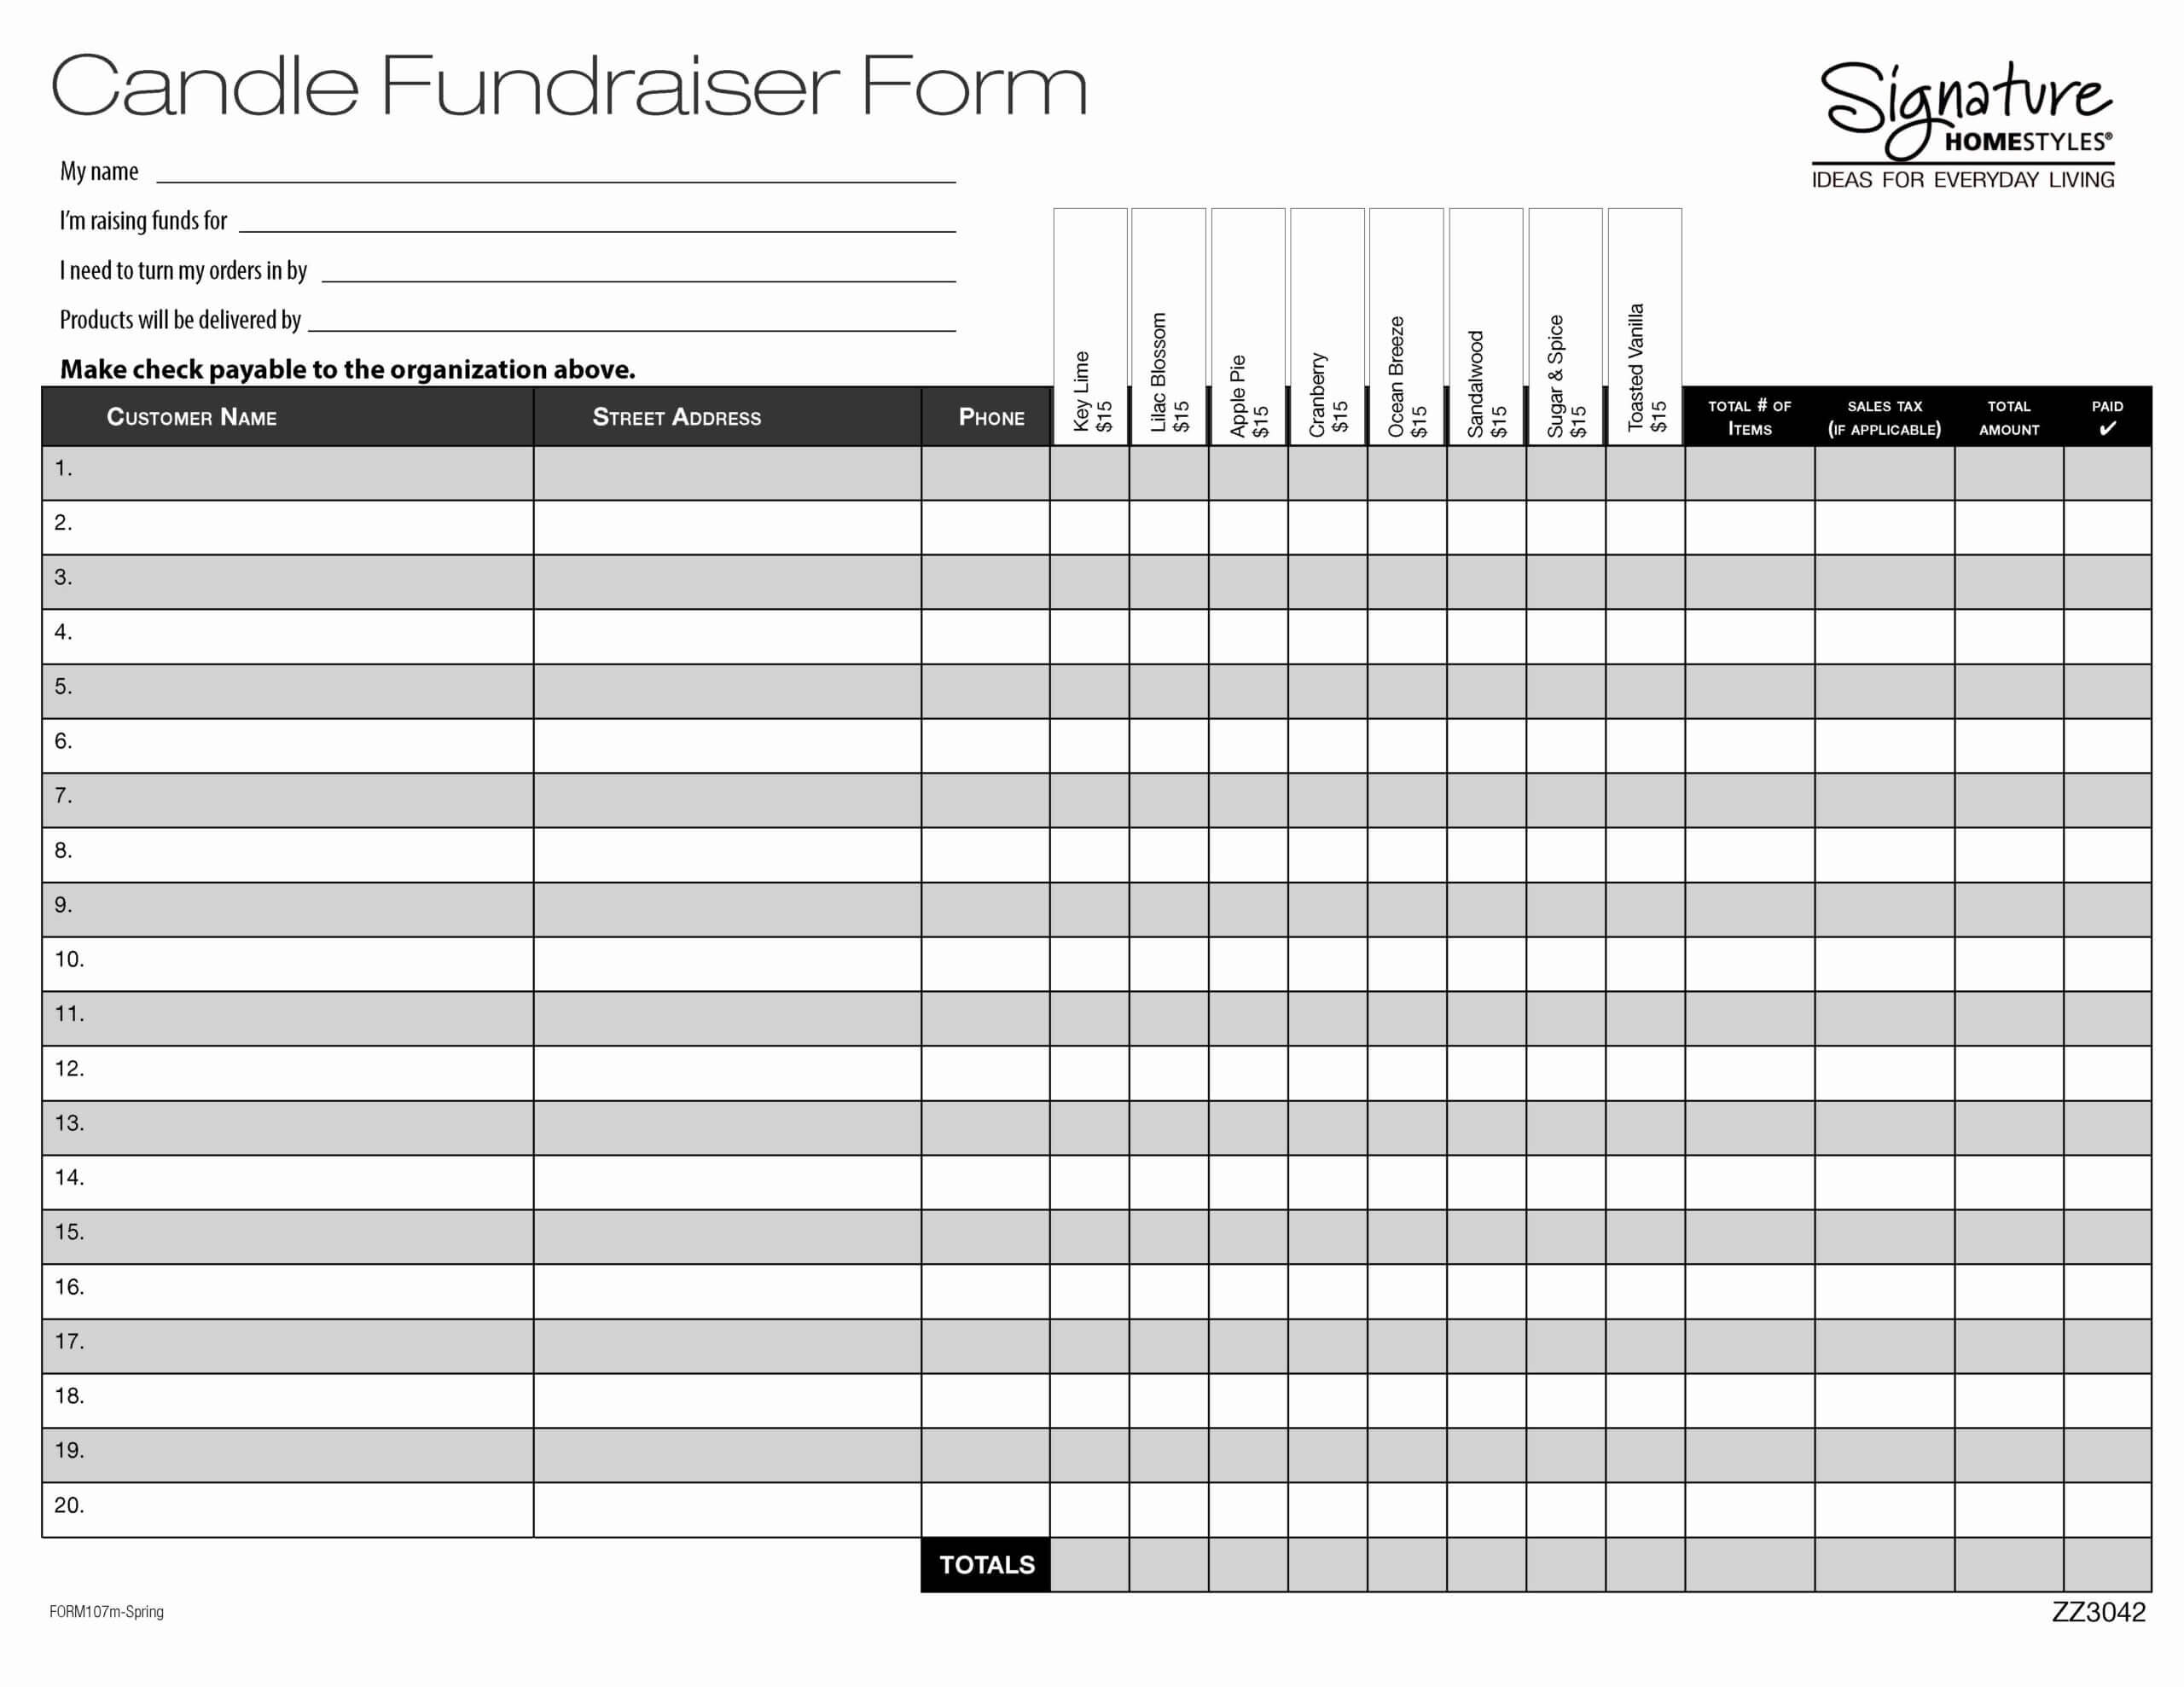 009 Fundraiser Order Form Template Luxury Sensational Ideas Pertaining To Blank Fundraiser Order Form Template